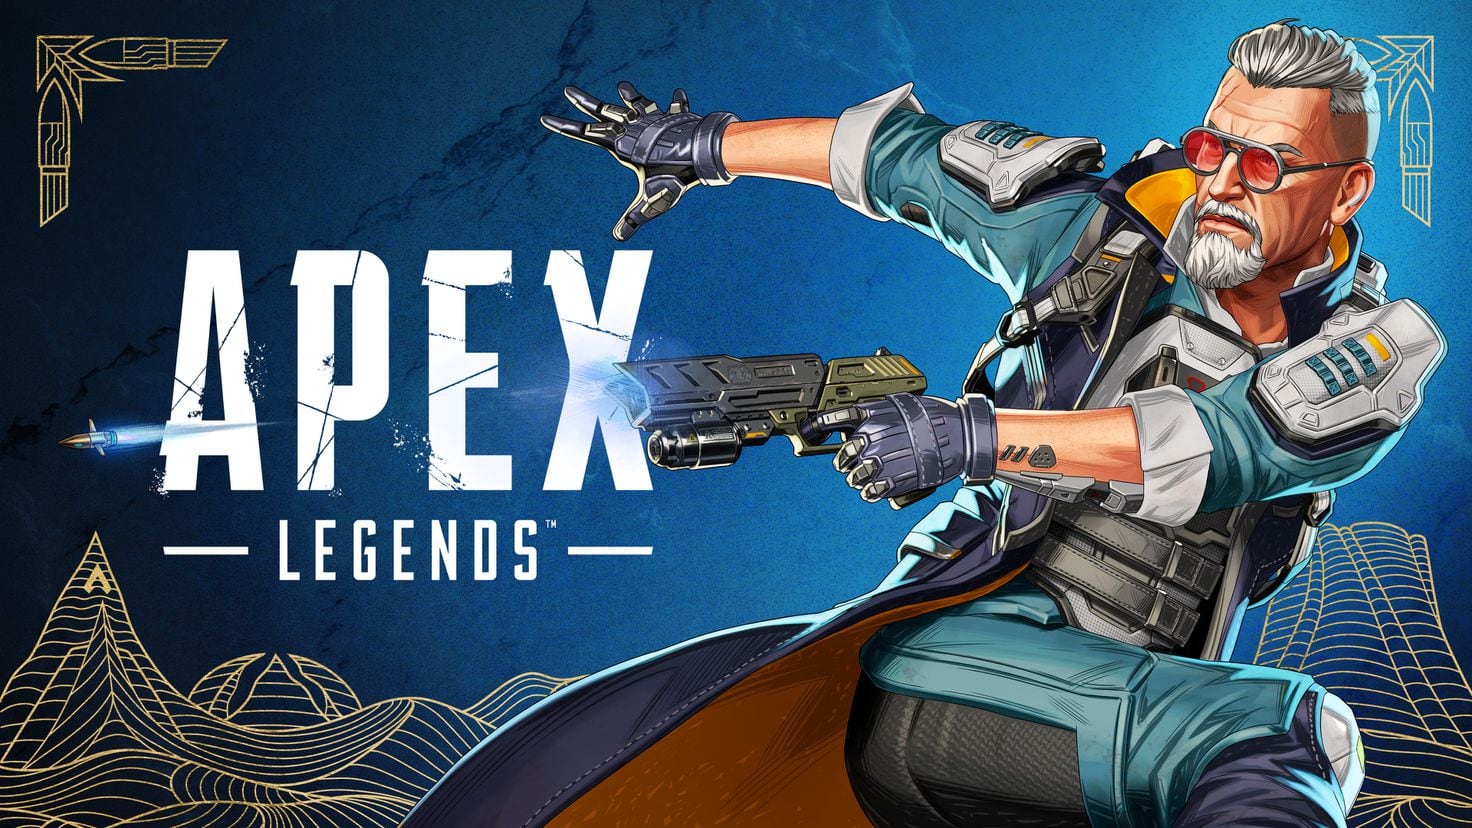 Apex Legends season 7 preview offers new character and map details